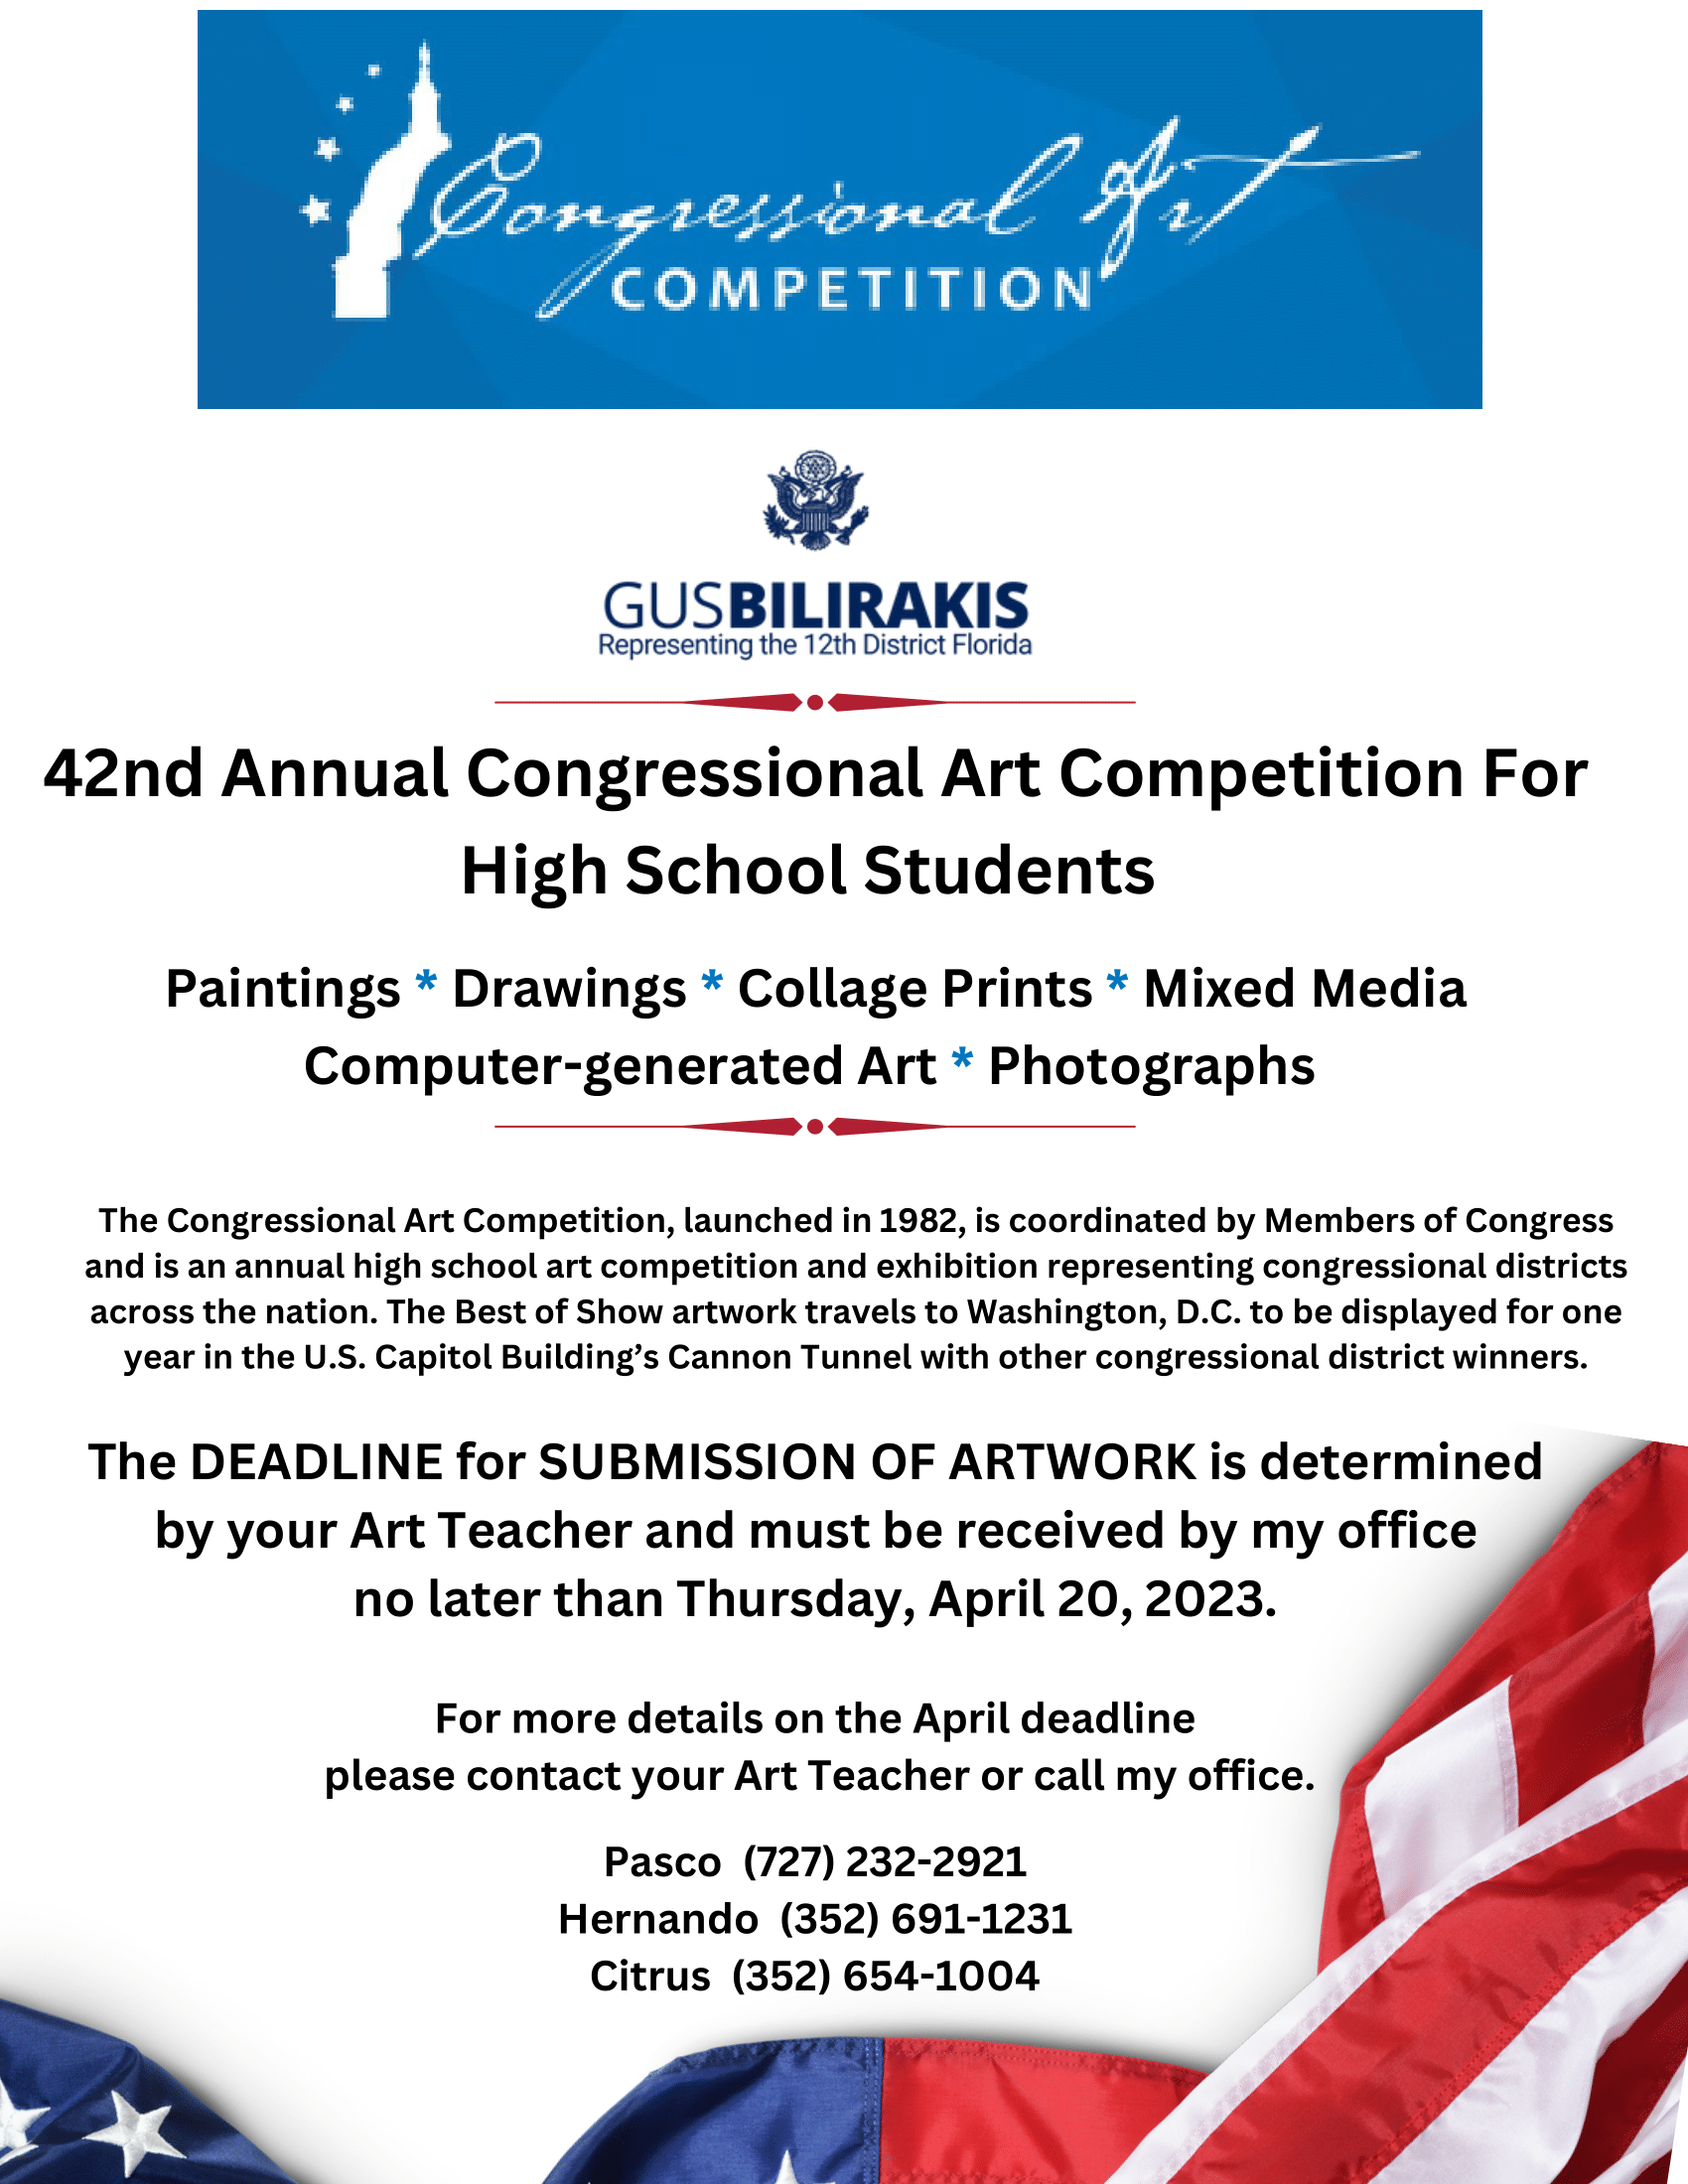 https://www.house.gov/educators-and-students/congressional-art-competition